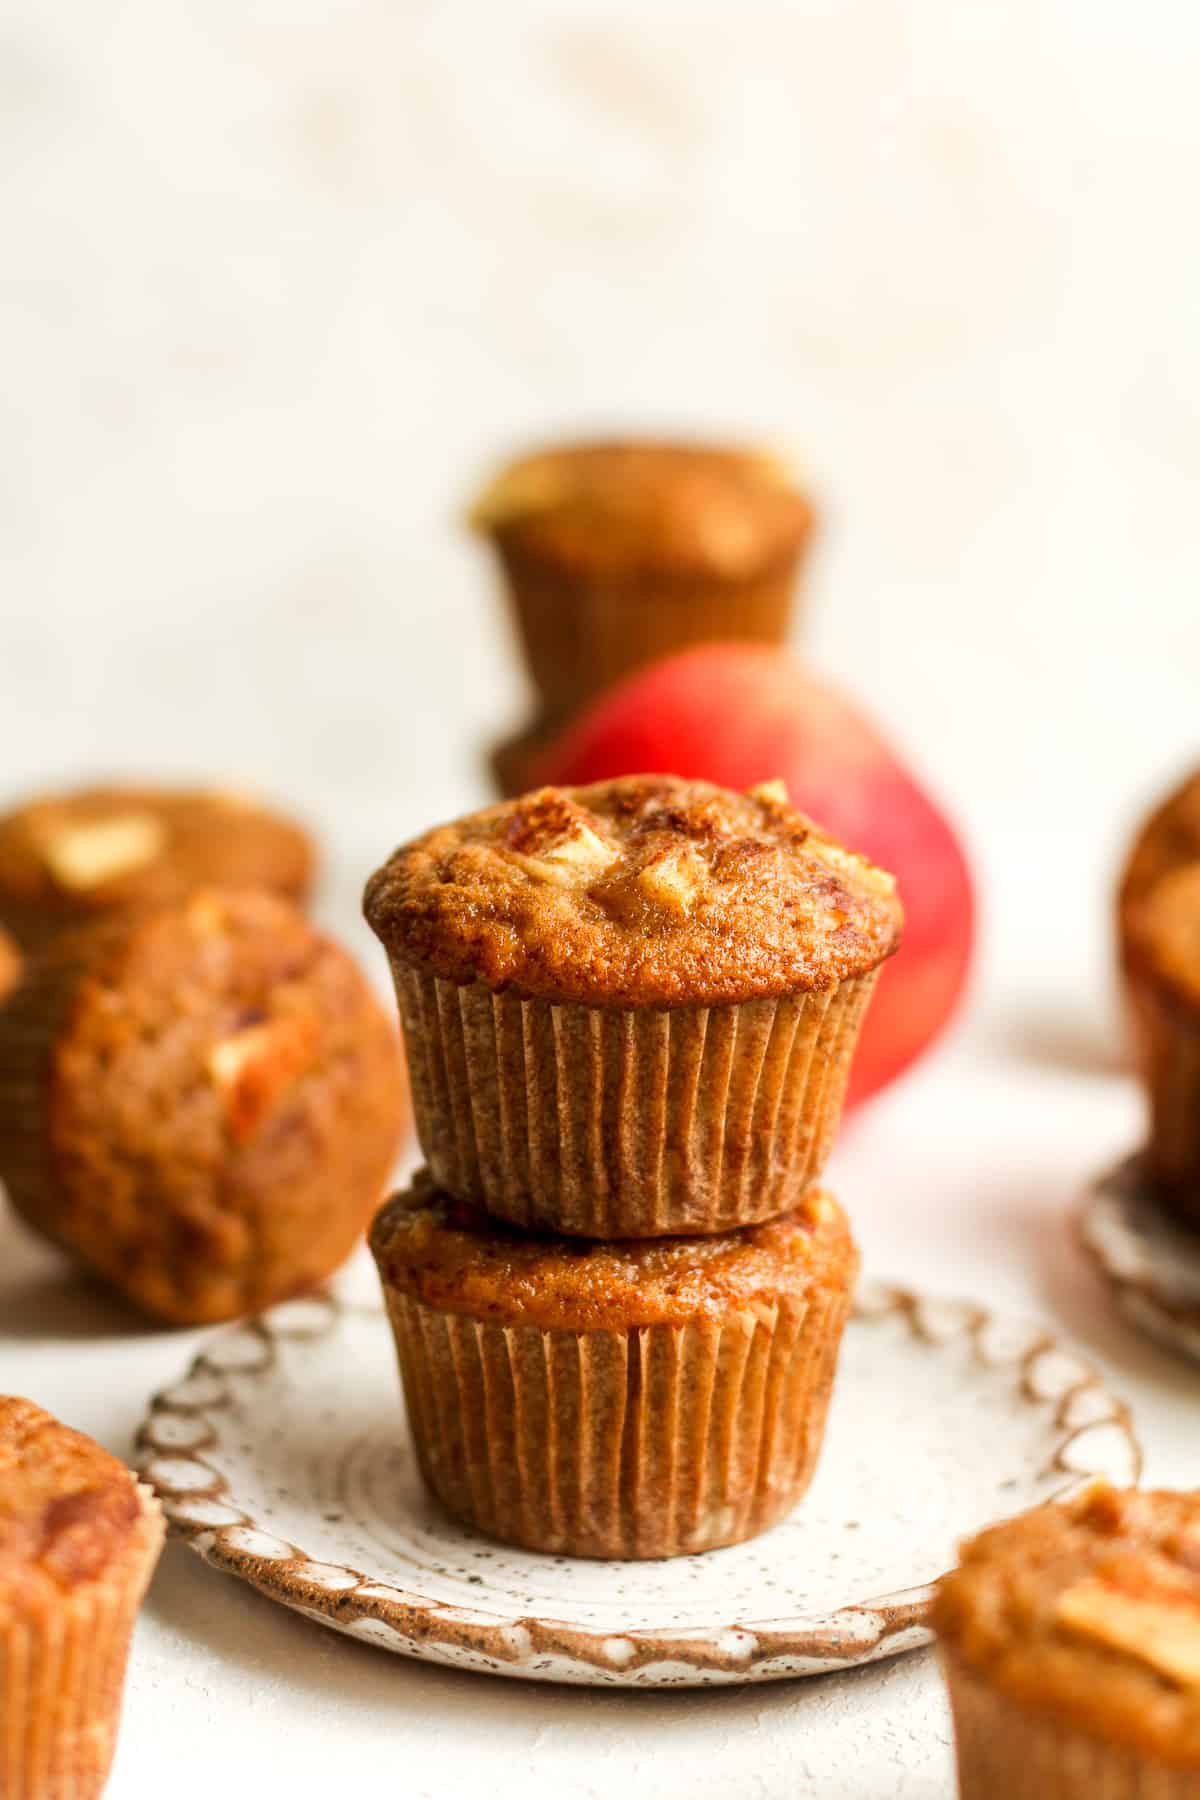 Side view of two stacked apple cinnamon muffins.